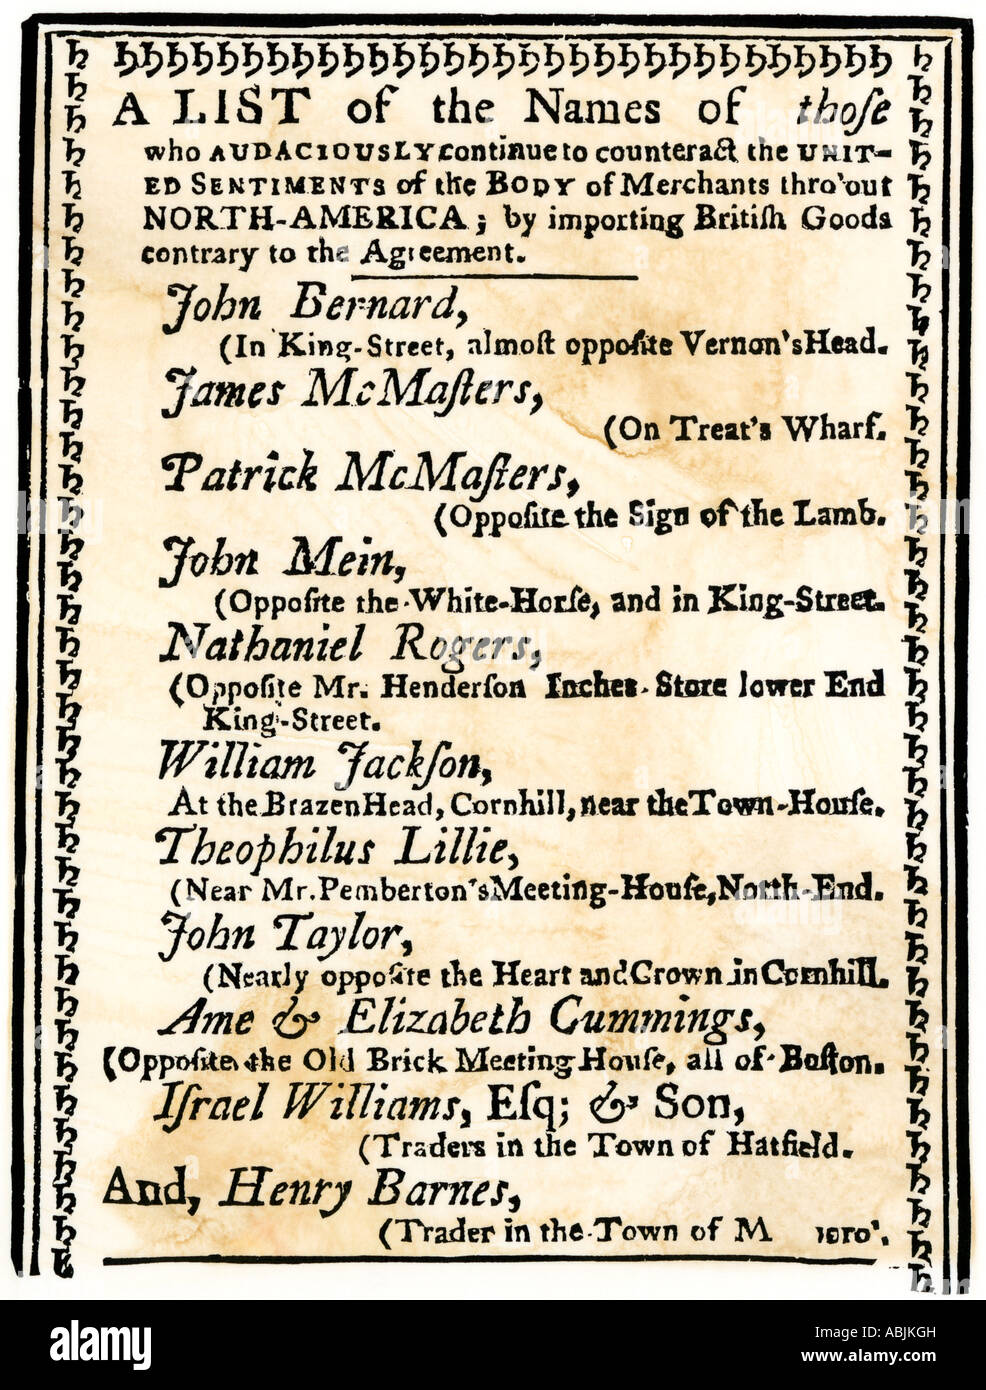 List of Boston merchants to be boycotted for importing British goods 1770. Woodcut with a watercolor wash Stock Photo